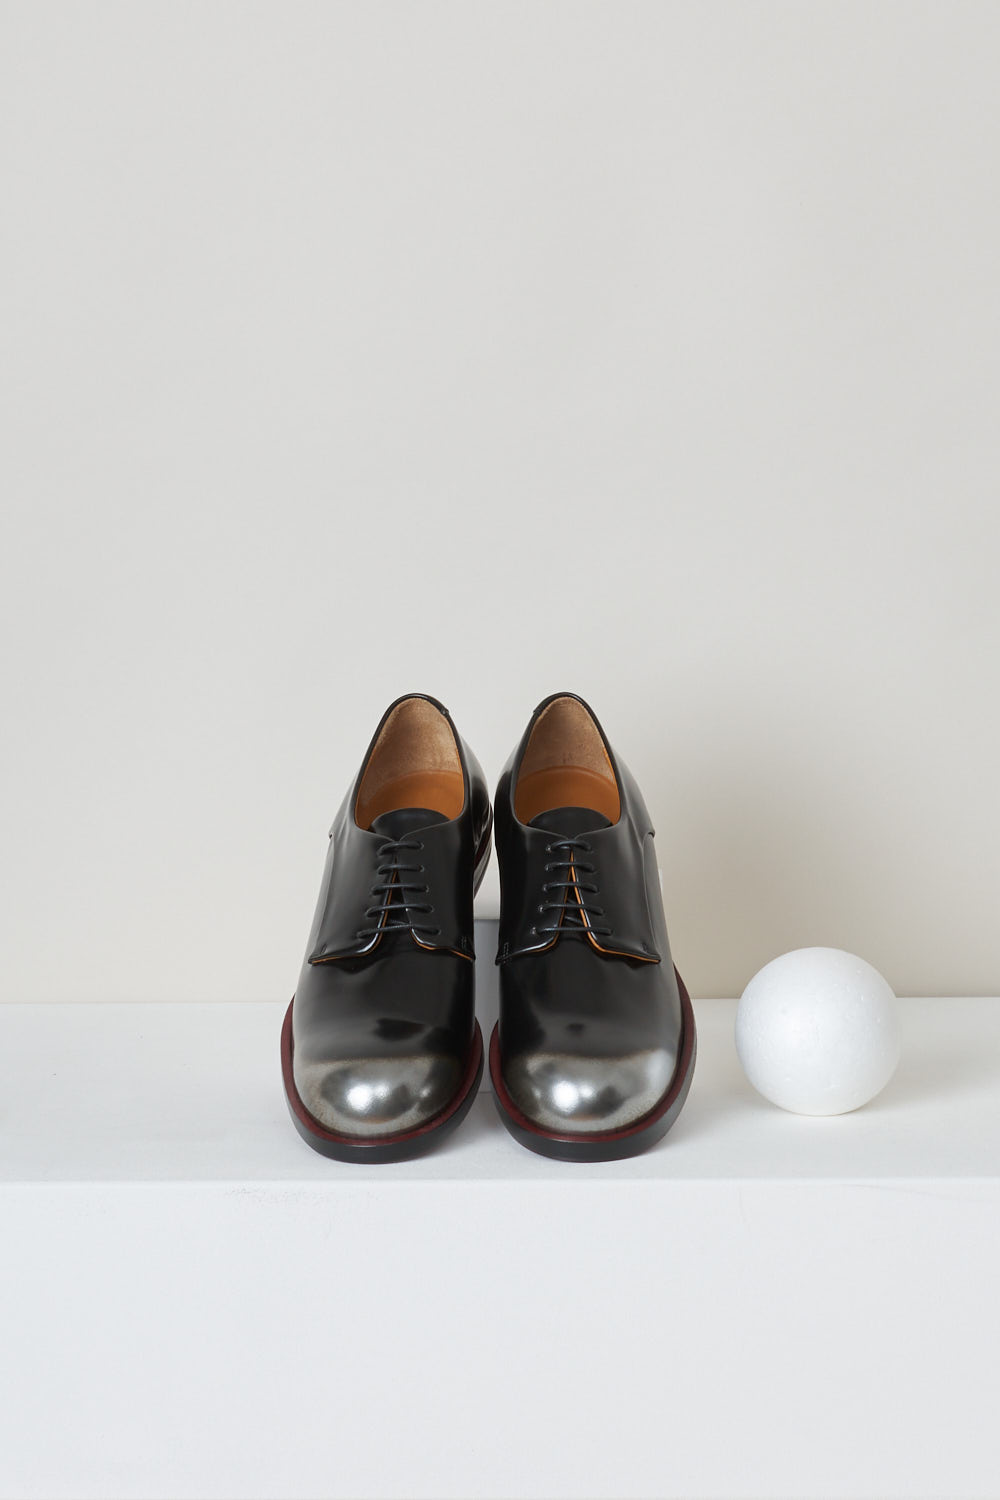 Jil Sander, Black derby shoes with silver and red accents, JS23018_1ASZ17_keope_tric_089, black, red, silver, top, Derby shoes in black with a silver heel and toes, and with red accents on the sole. 